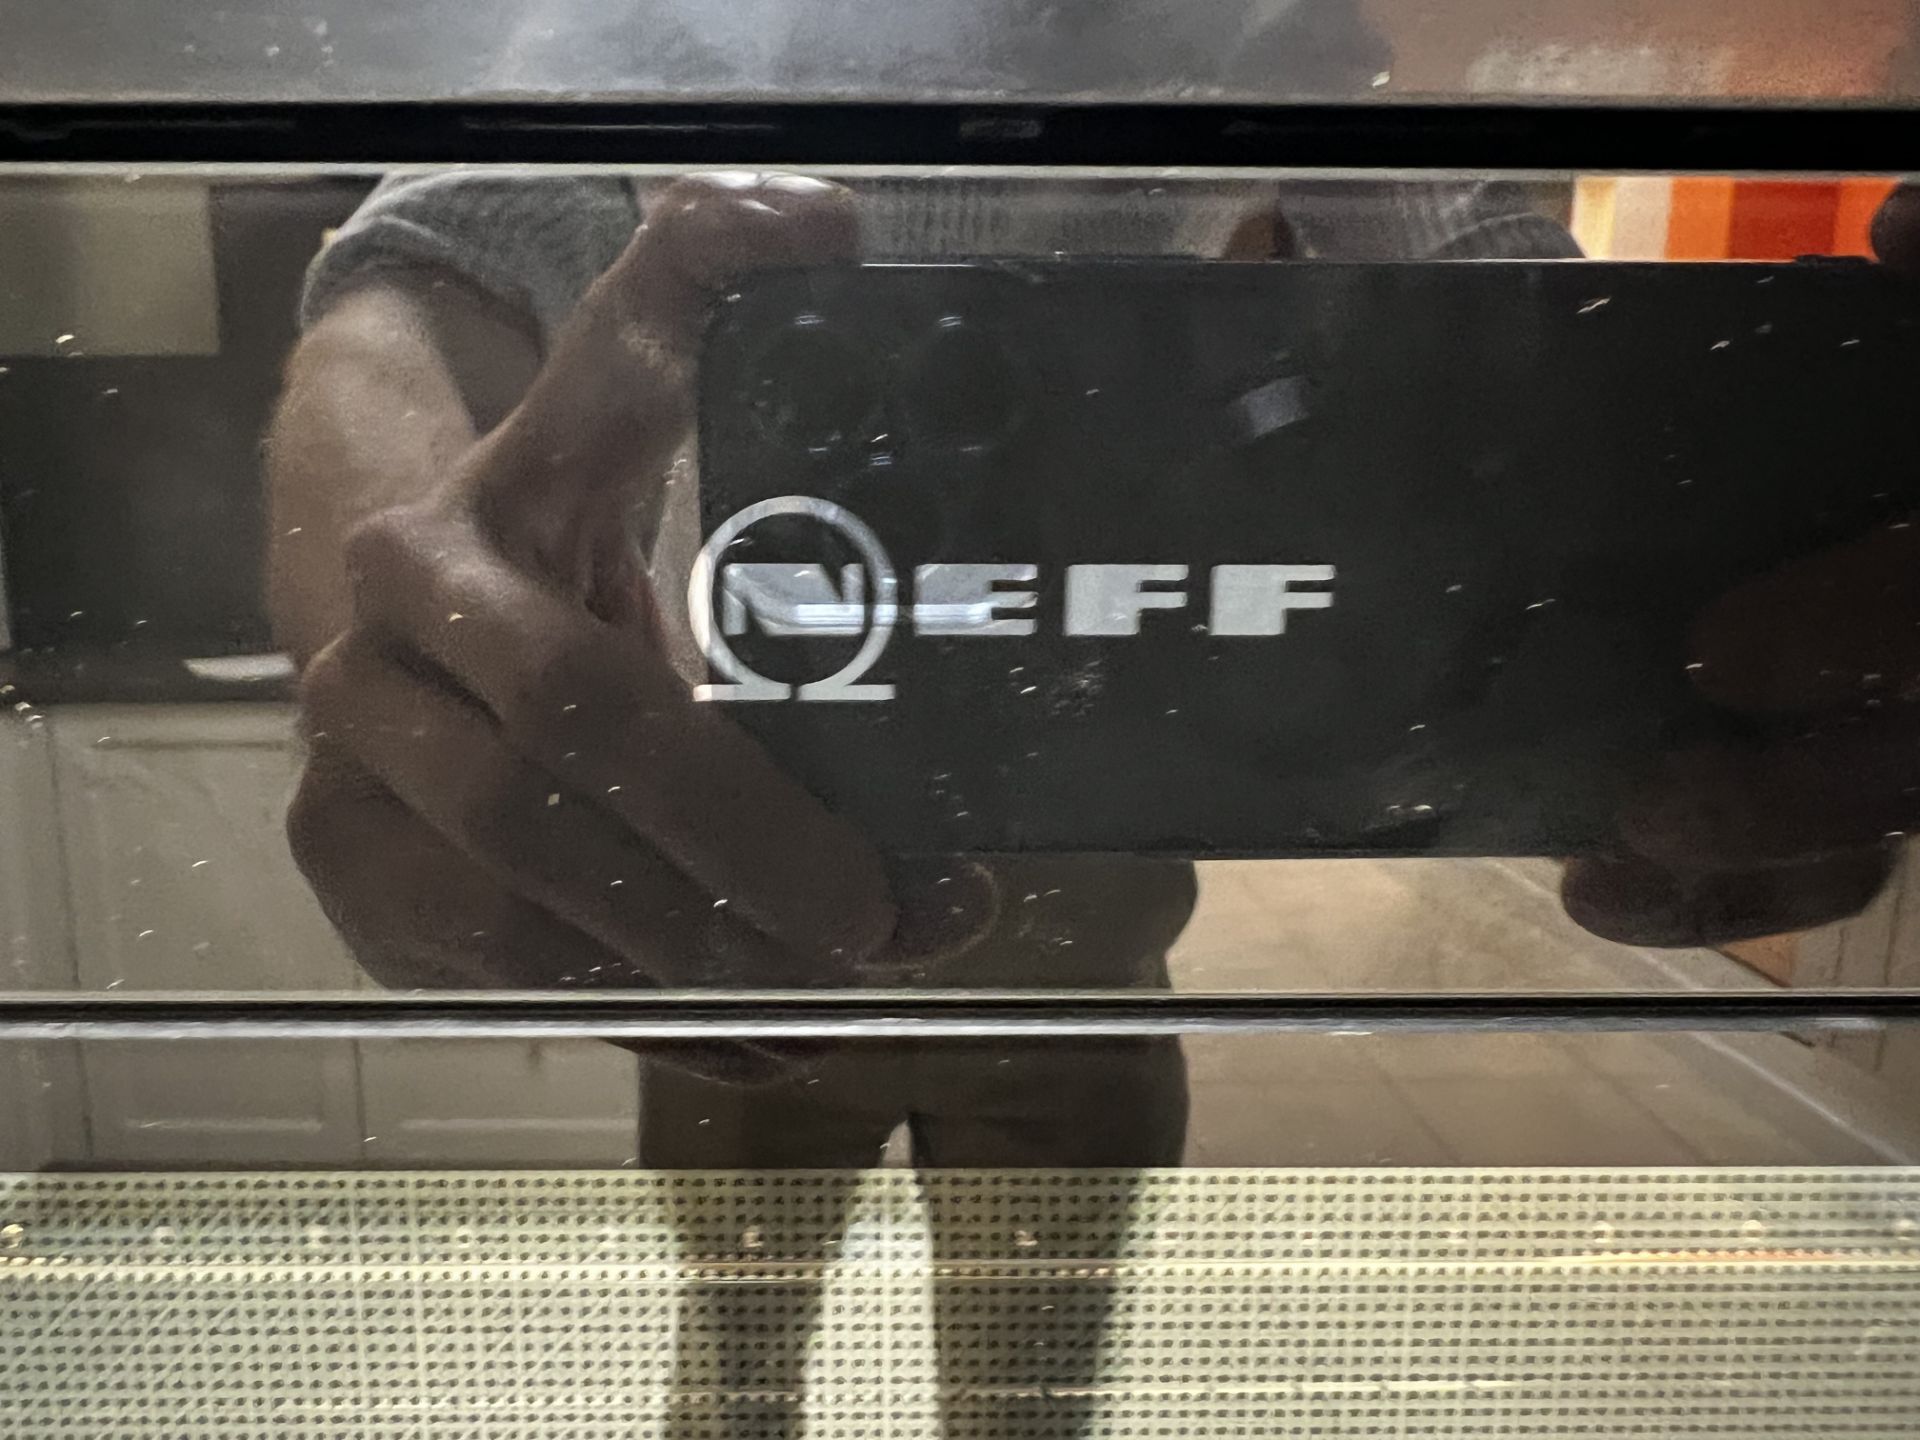 Neff 4 shelf built in oven/grill - Image 2 of 6